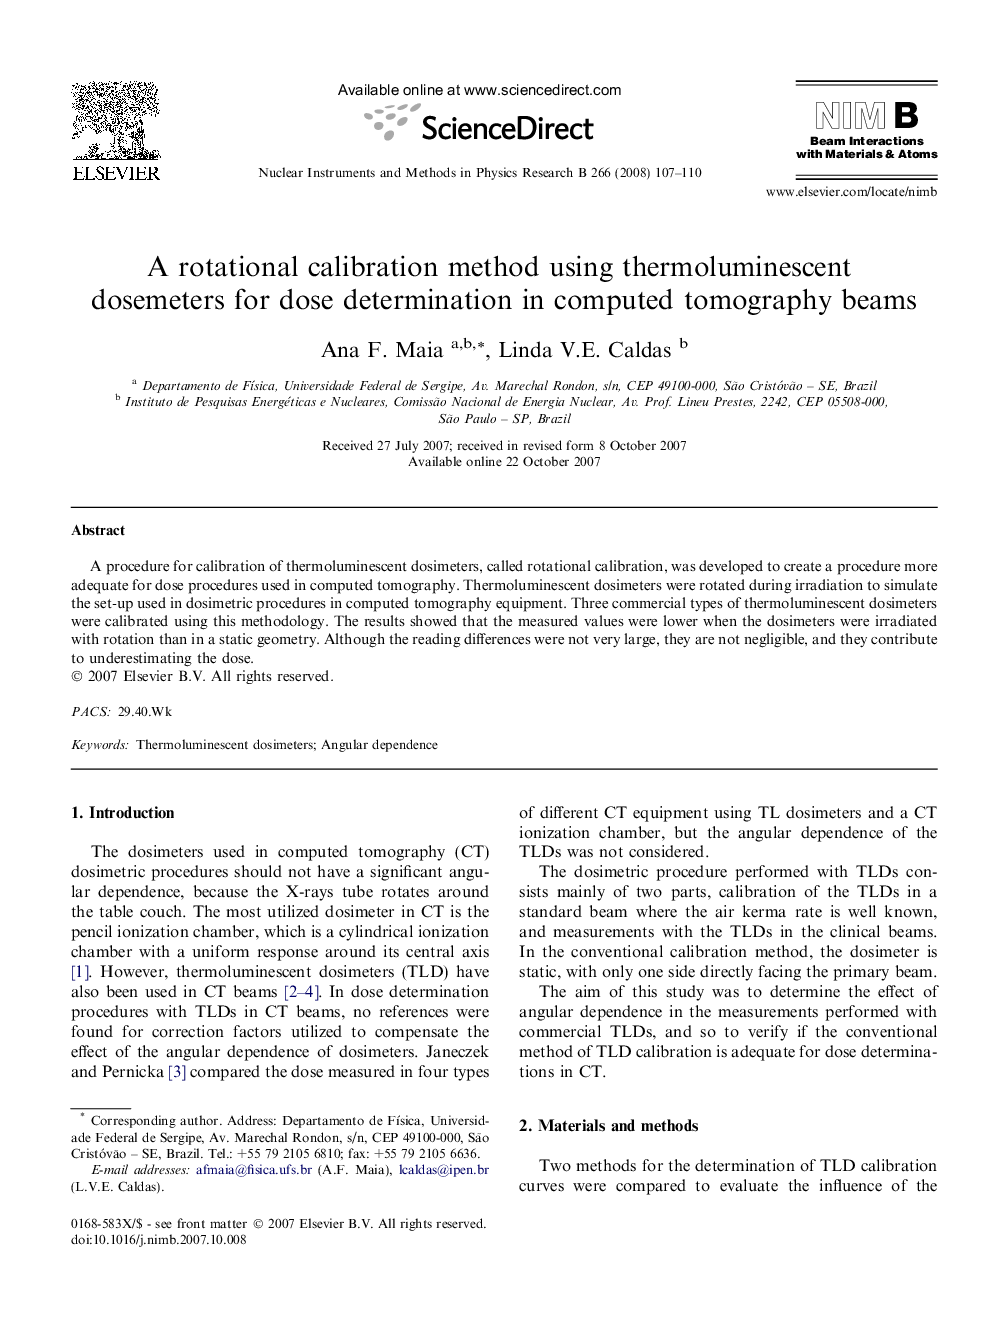 A rotational calibration method using thermoluminescent dosemeters for dose determination in computed tomography beams